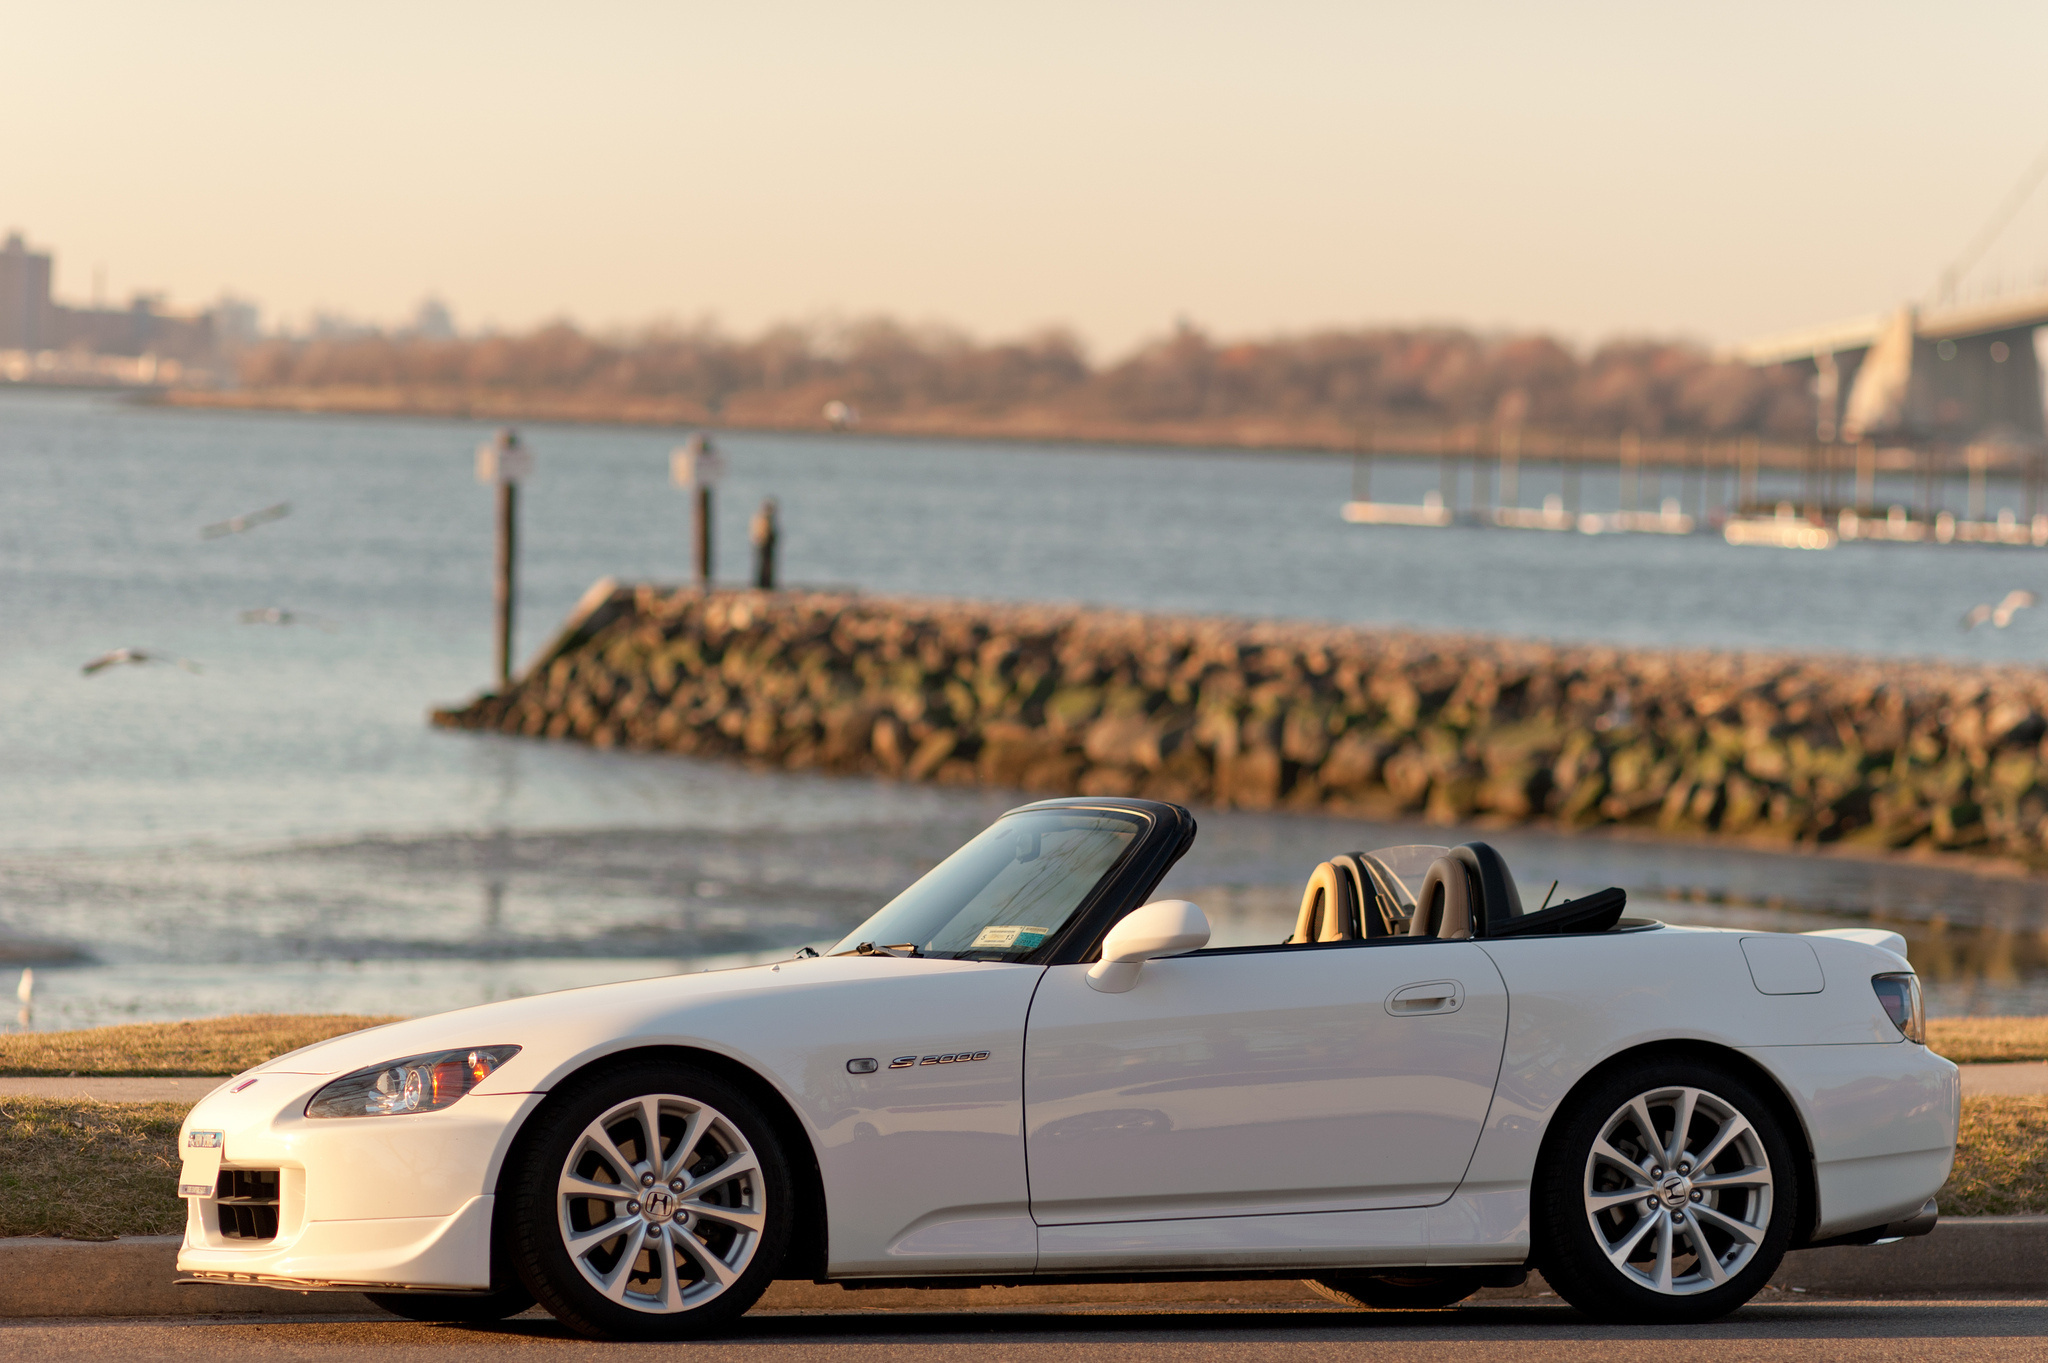 Honda S2000, Download now, Automotive excellence, High-quality wallpapers, 2050x1370 HD Desktop